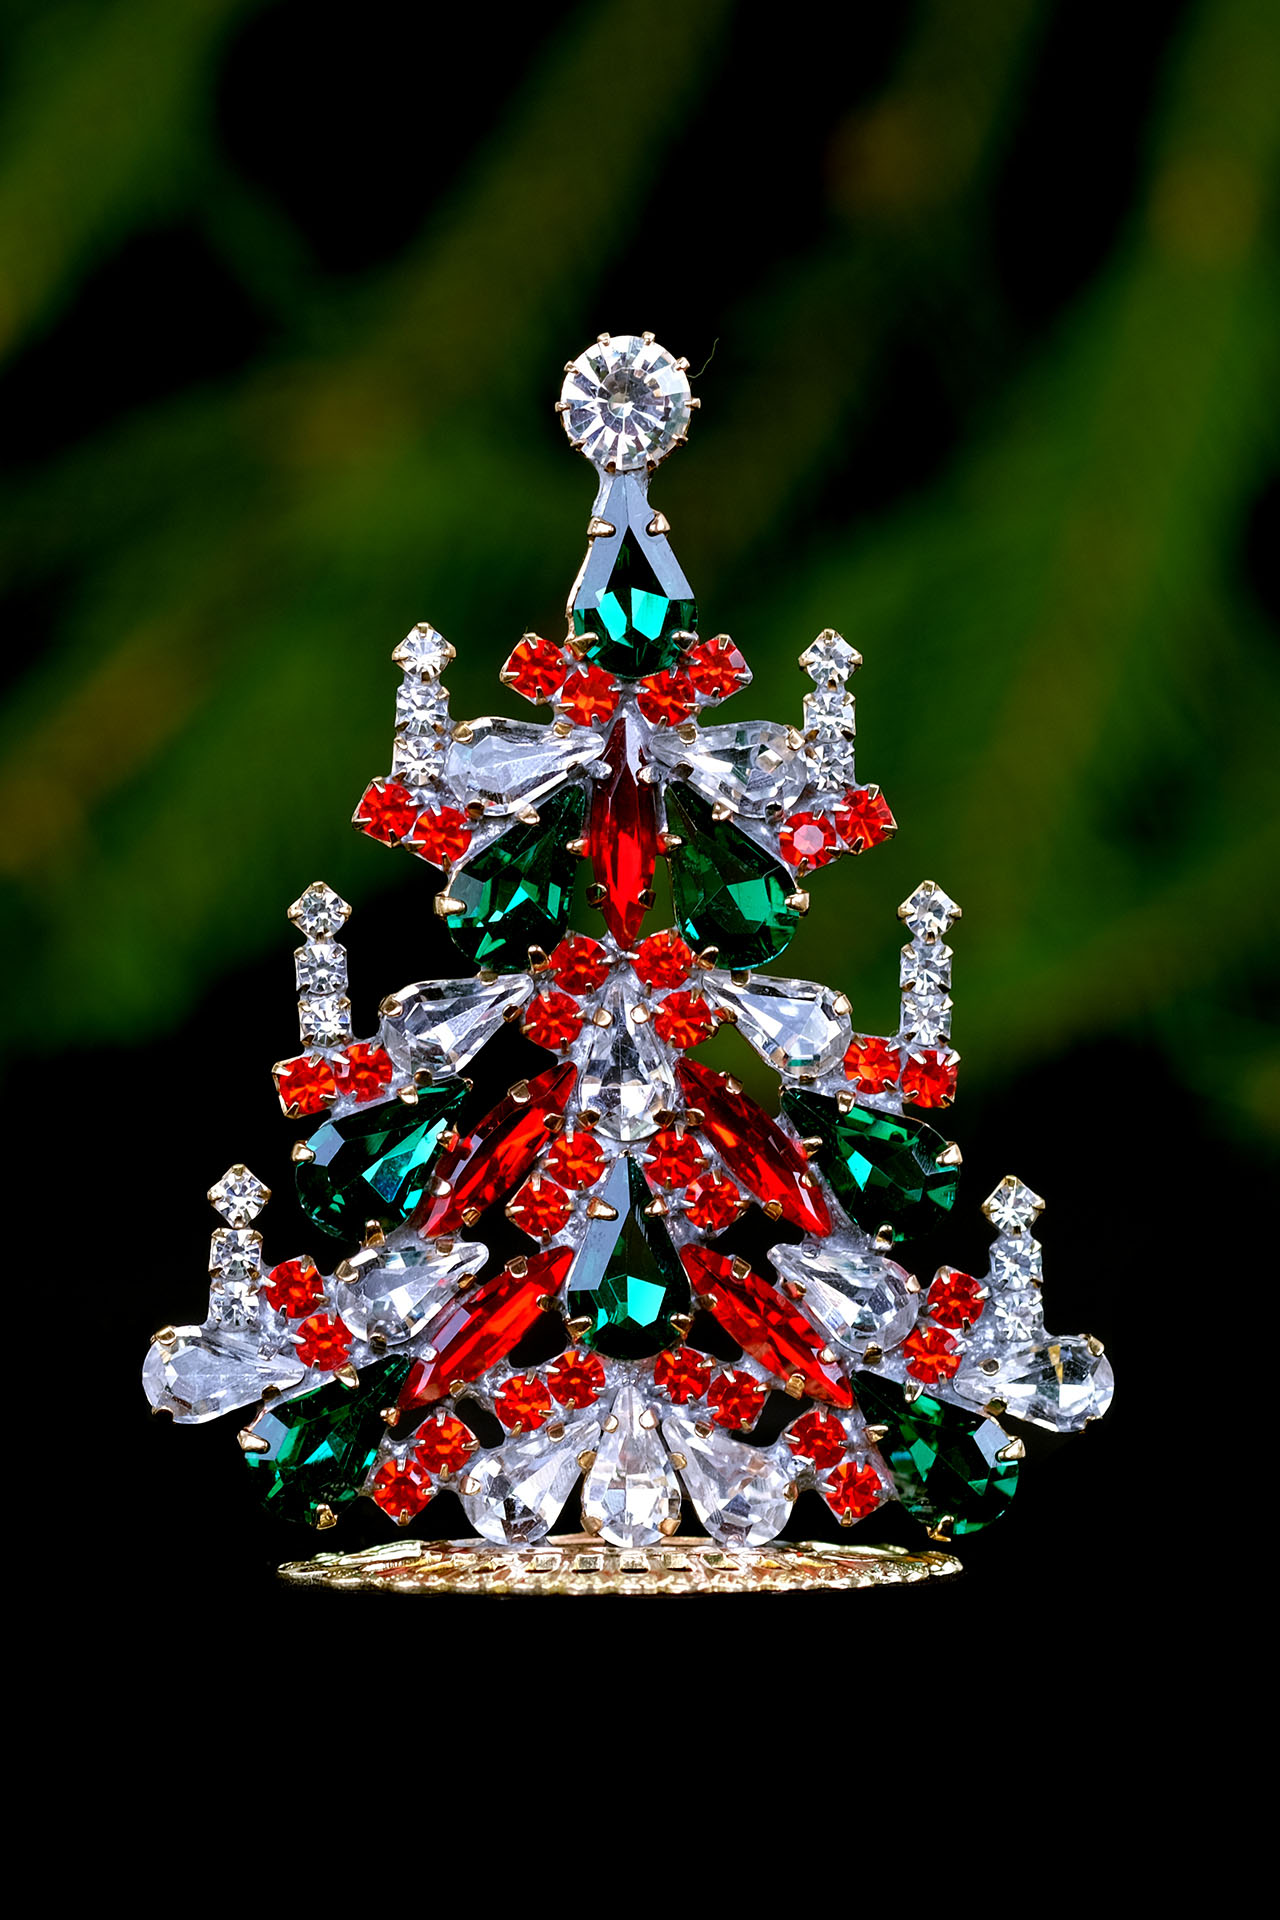 Festive Cheer tree, handcrafted jewelry Christmas ornament